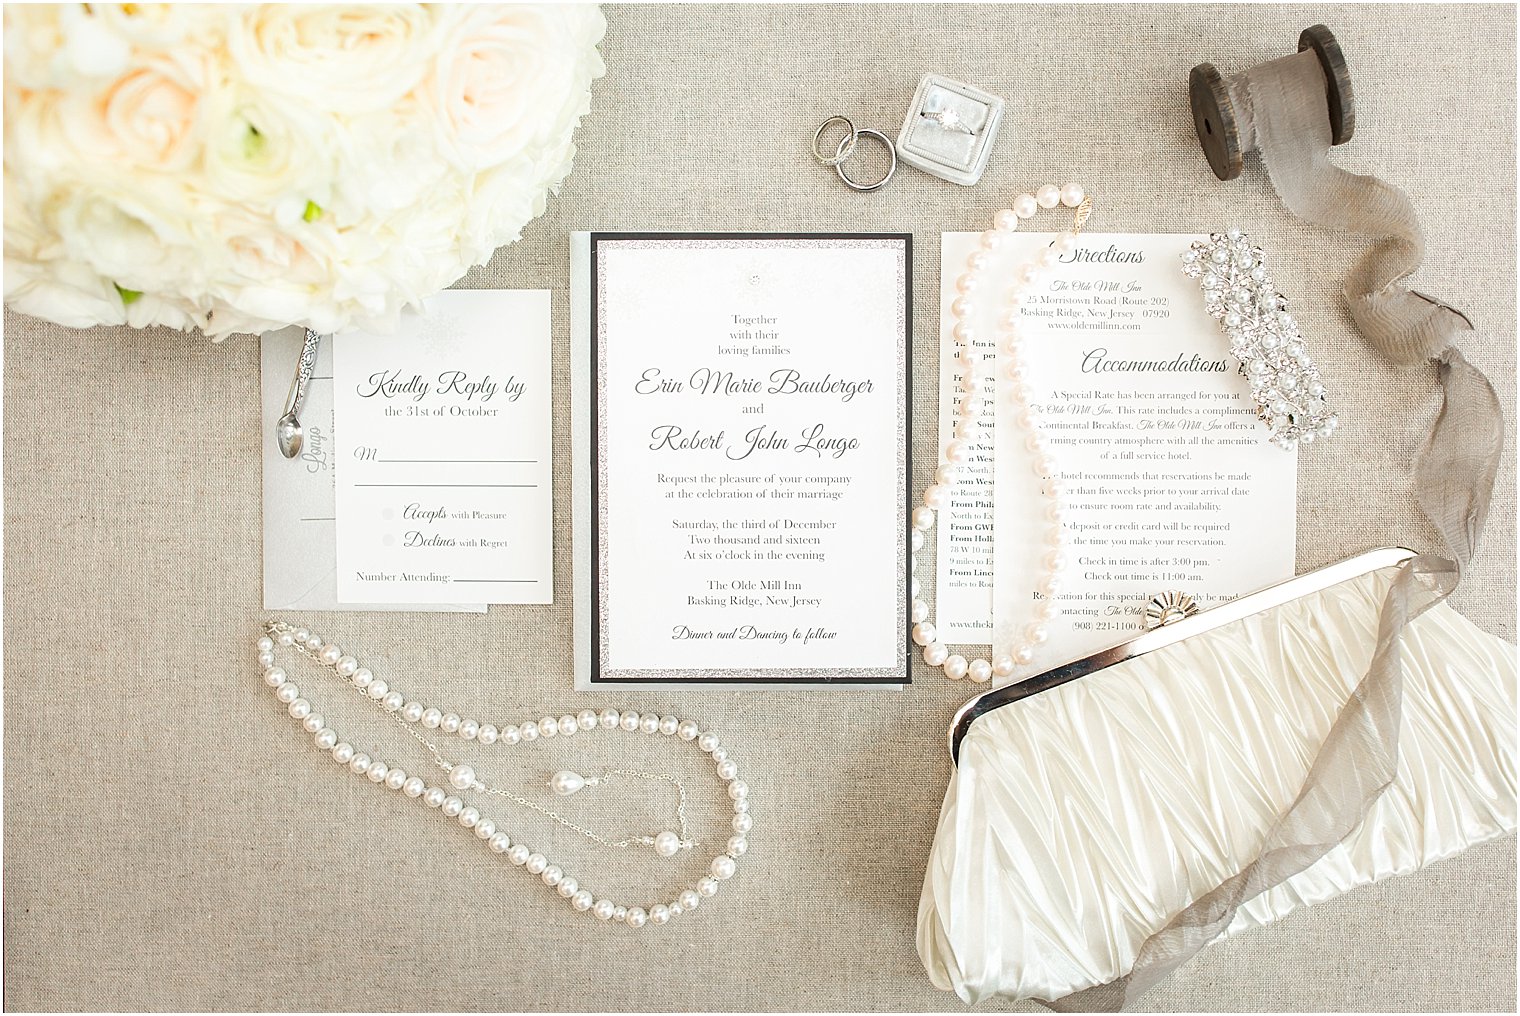 Florals by Conroy’s Florist | Invitations by Kristin Broek Designs